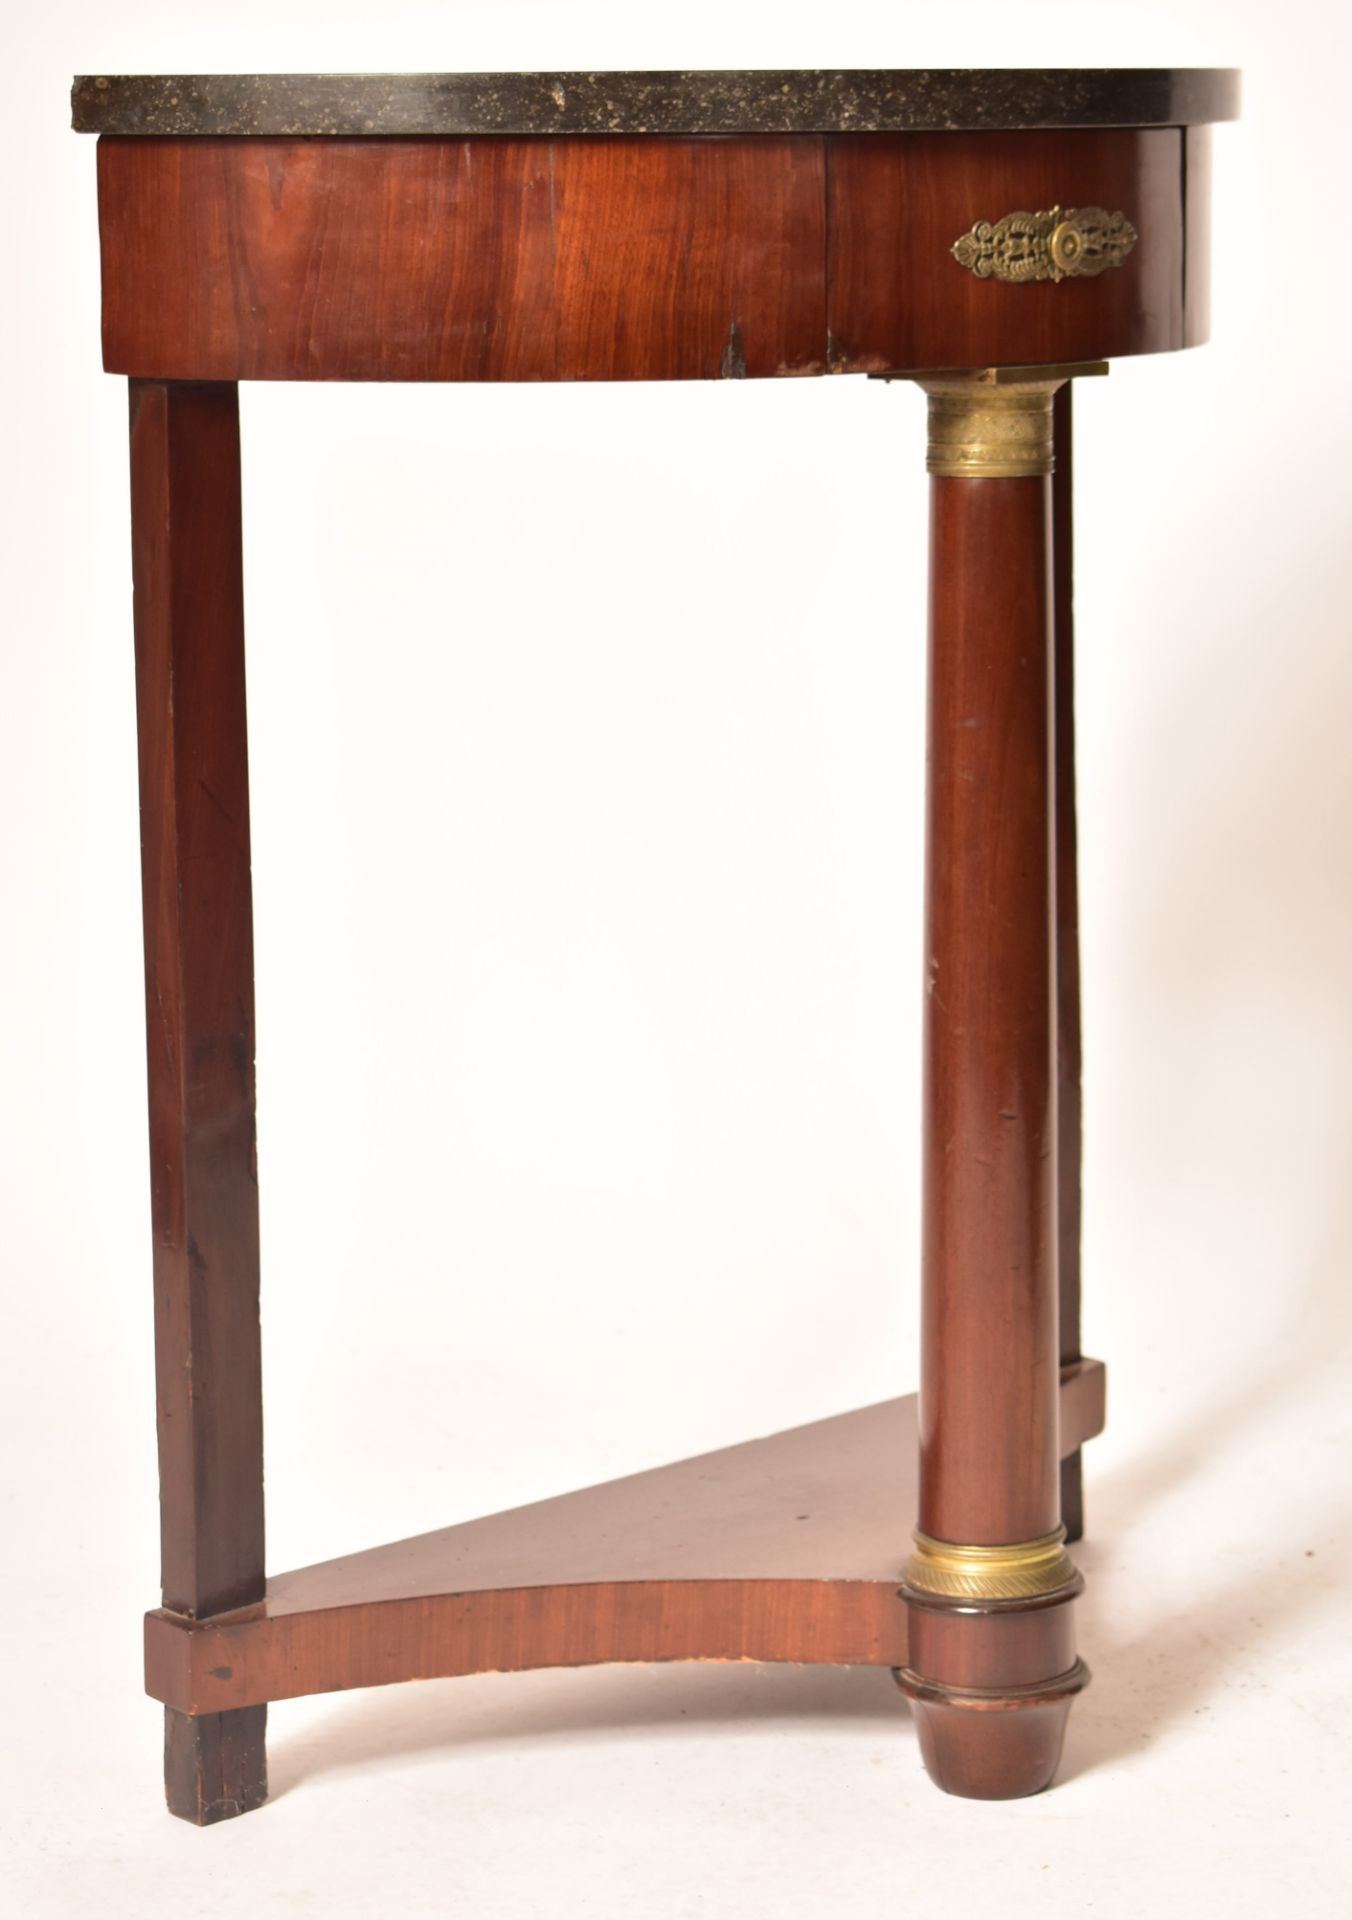 PAIR OF BIEDERMEIER WALNUT & MARBLE CONSOLE HALL TABLES - Image 3 of 9